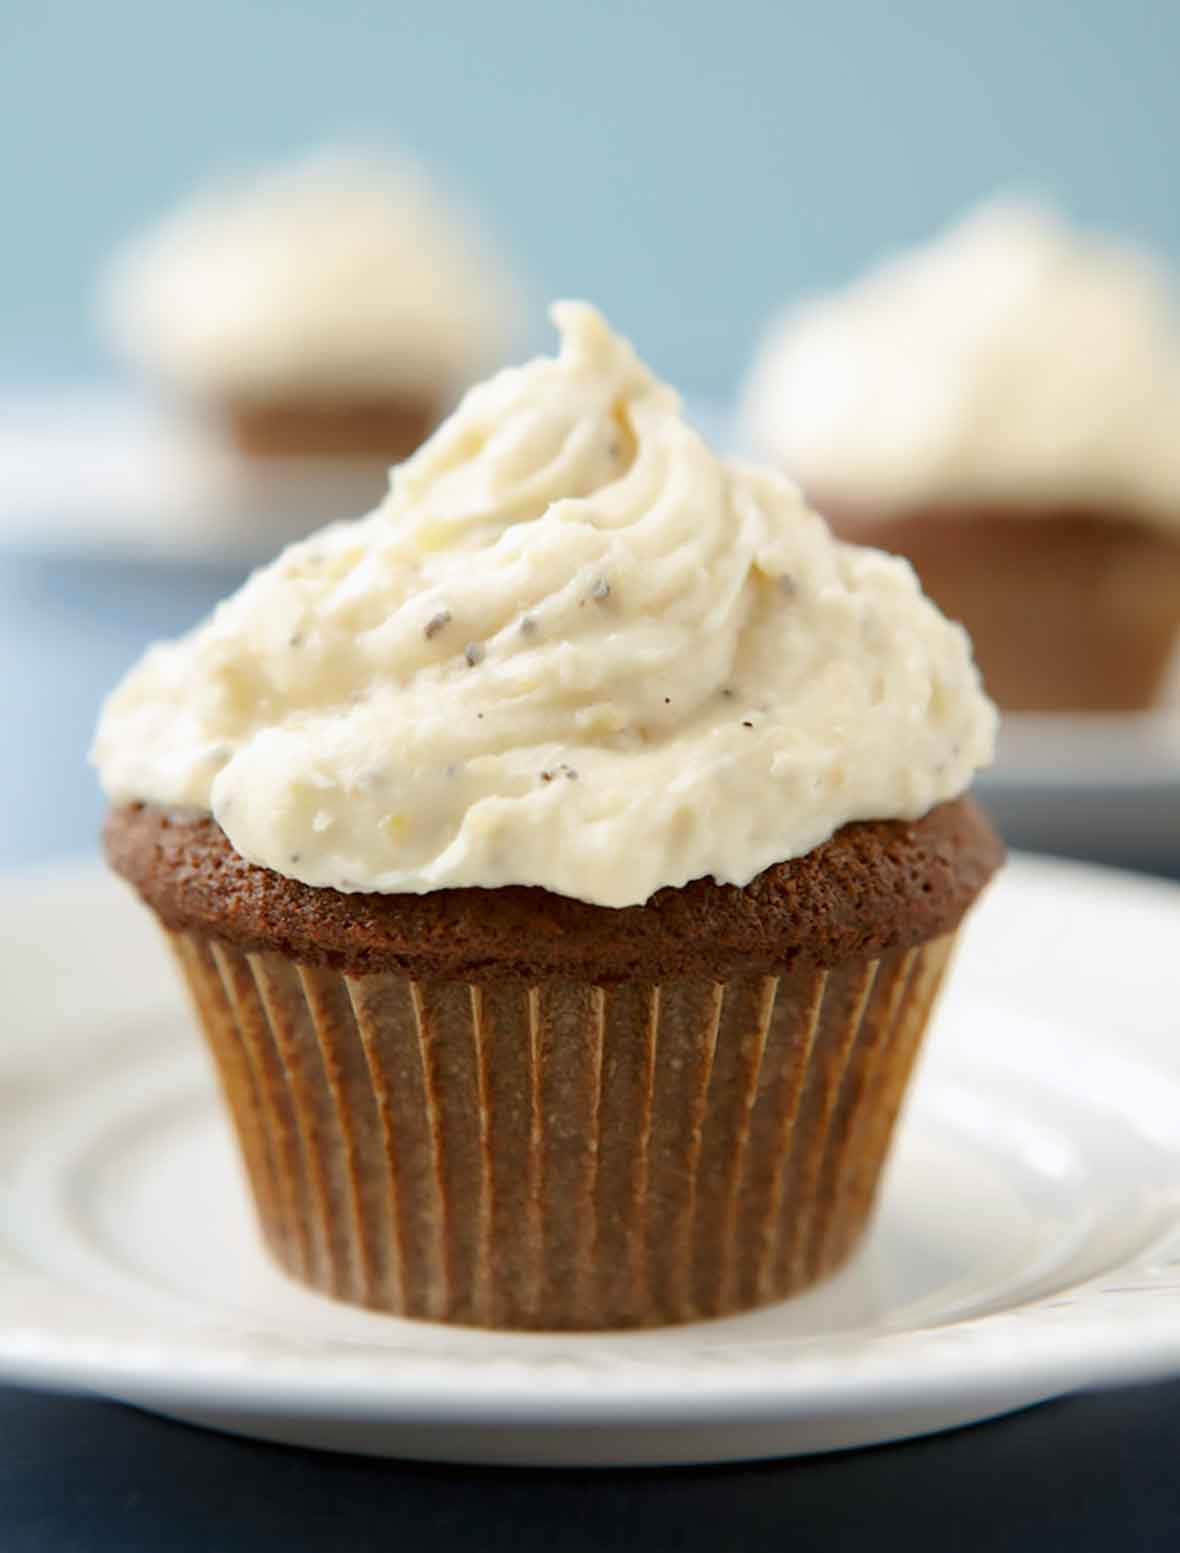 Gingerbread cupcakes with cardamom cream cheese frosting on a white plate.